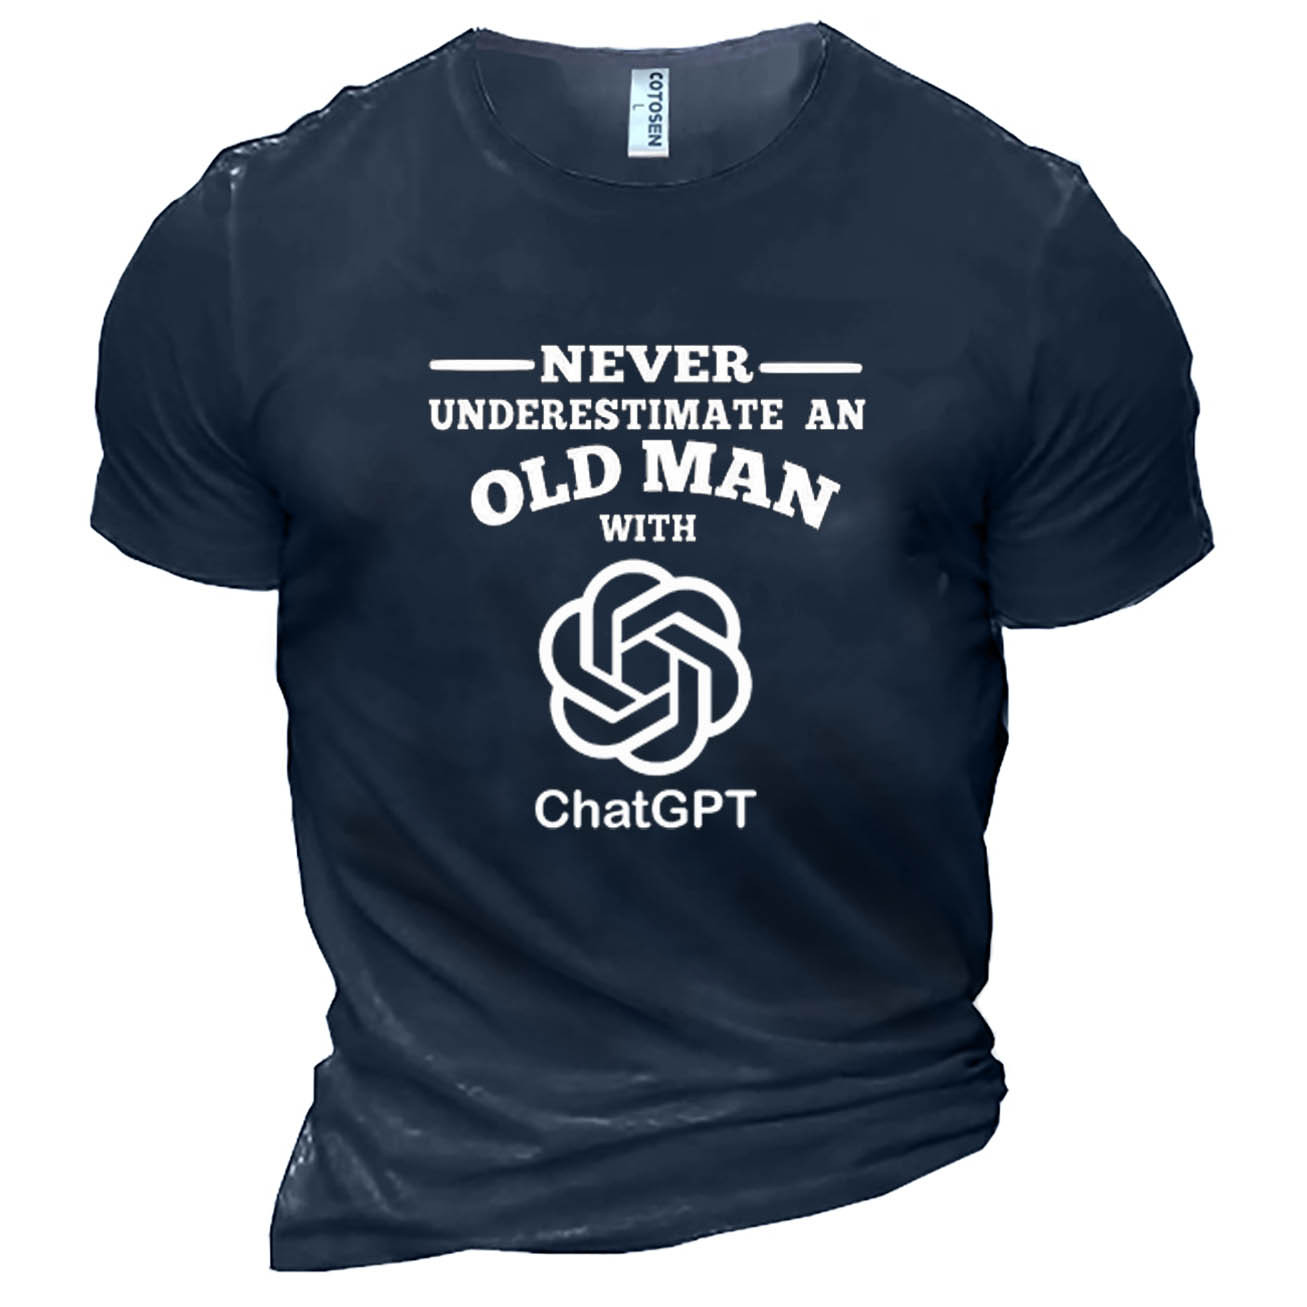 Men's Never Underestimate An Chic Old Man With Chatgpt Cotton T-shirt